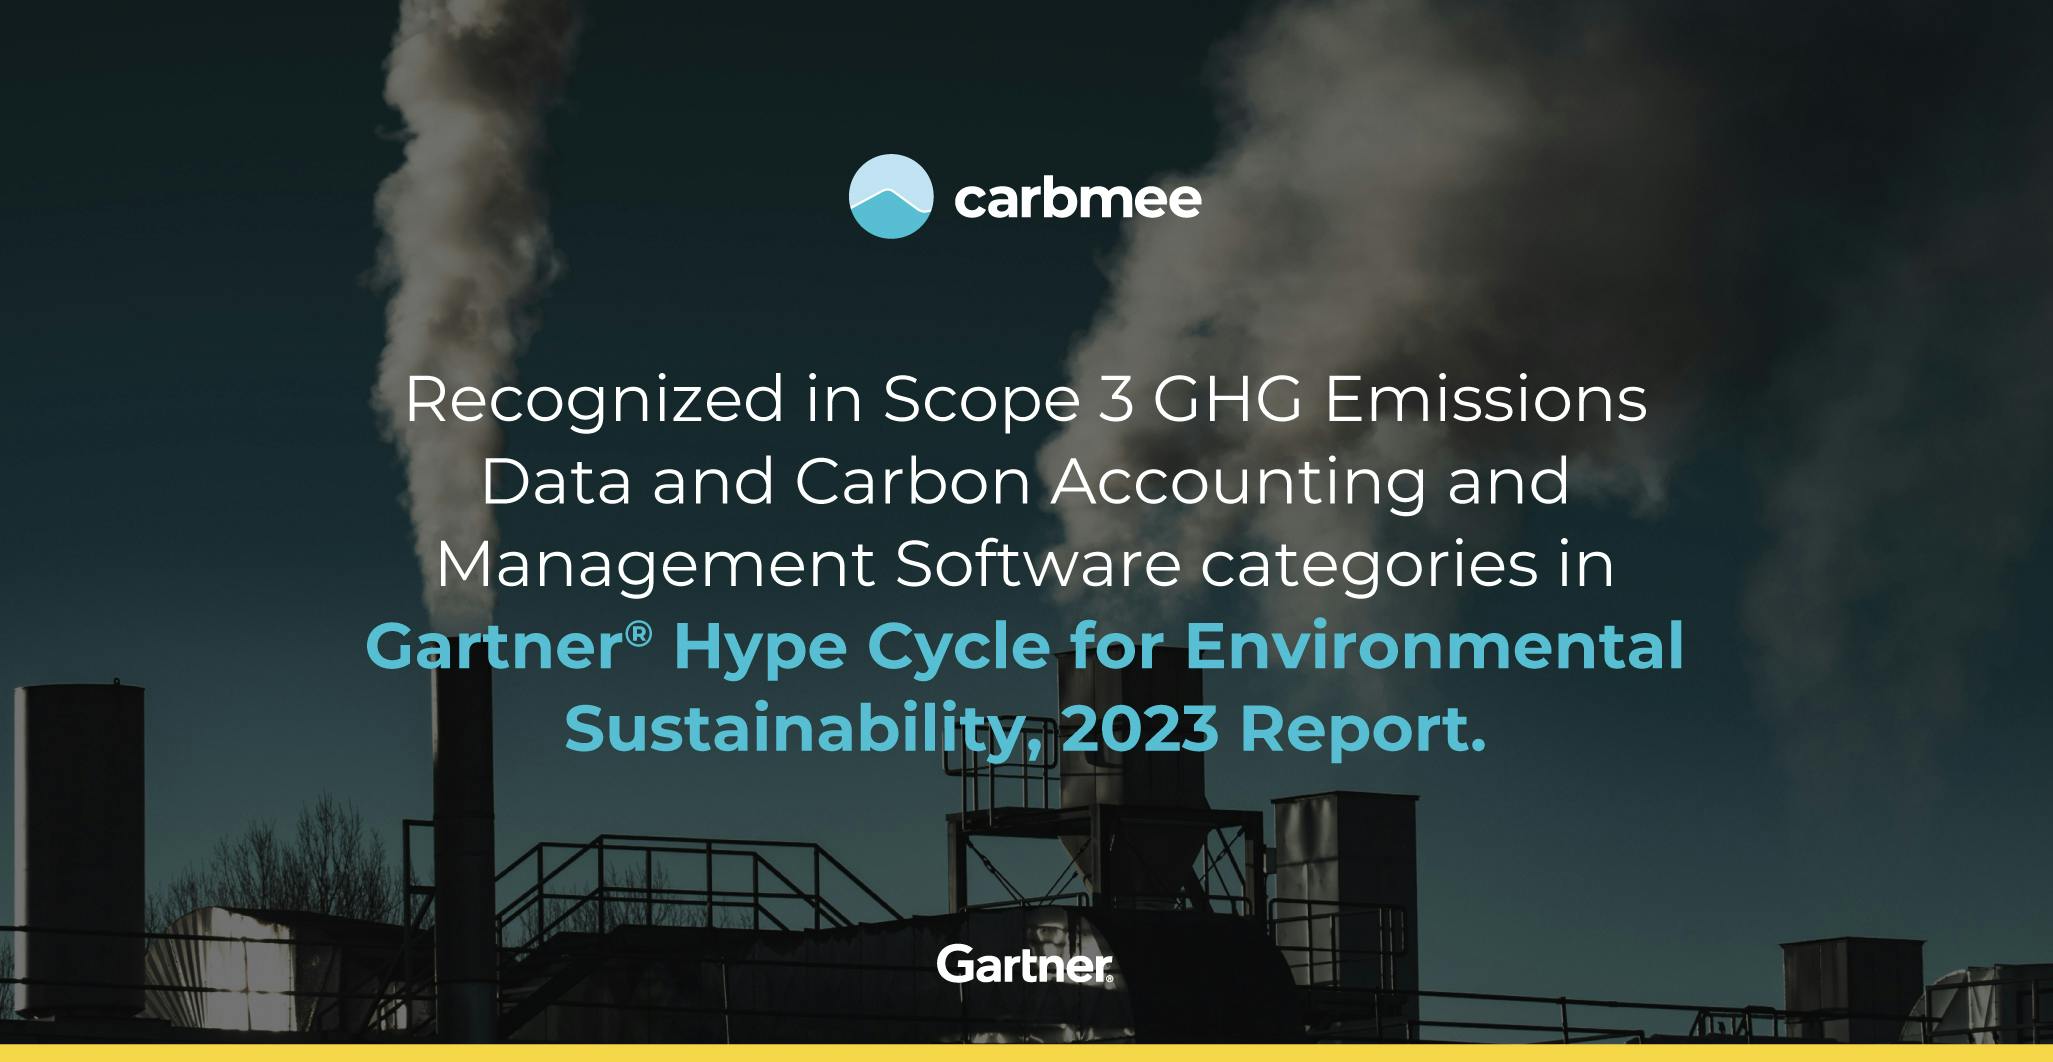 Carbmee Recognized in 2023 Gartner® Hype Cycle™ for Environmental Sustainability.